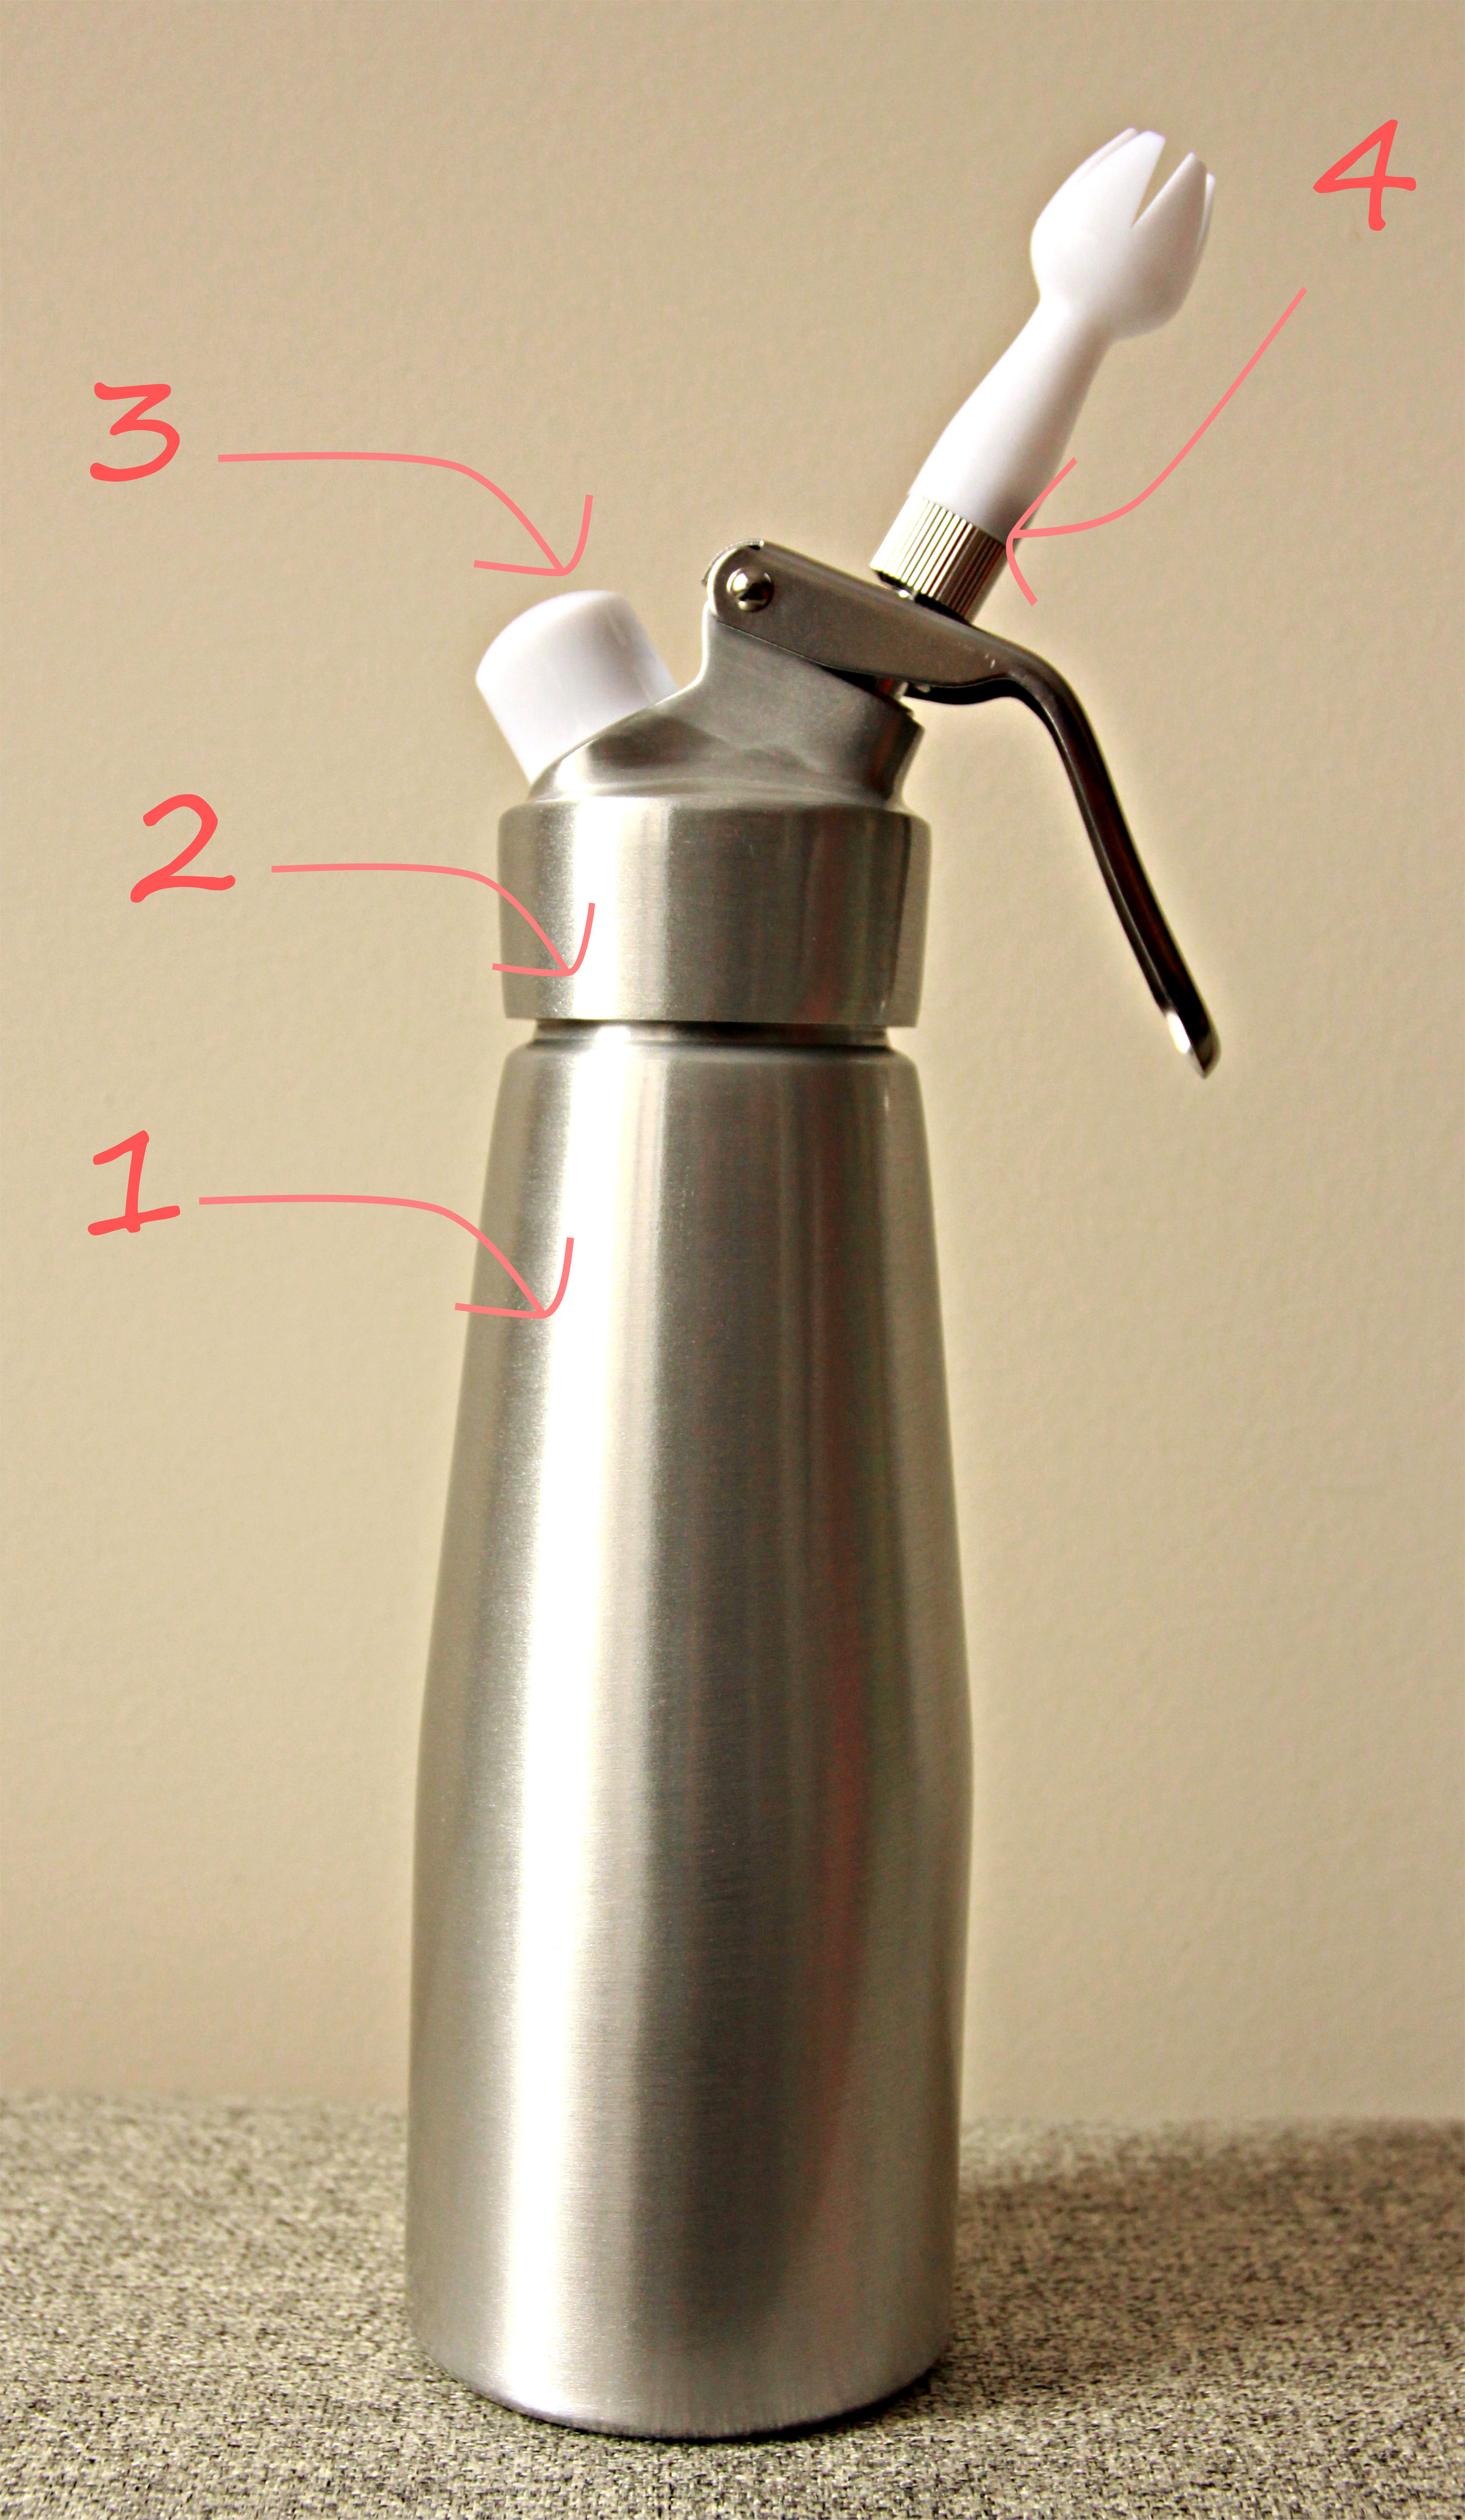 How to Use a Whipping Siphon